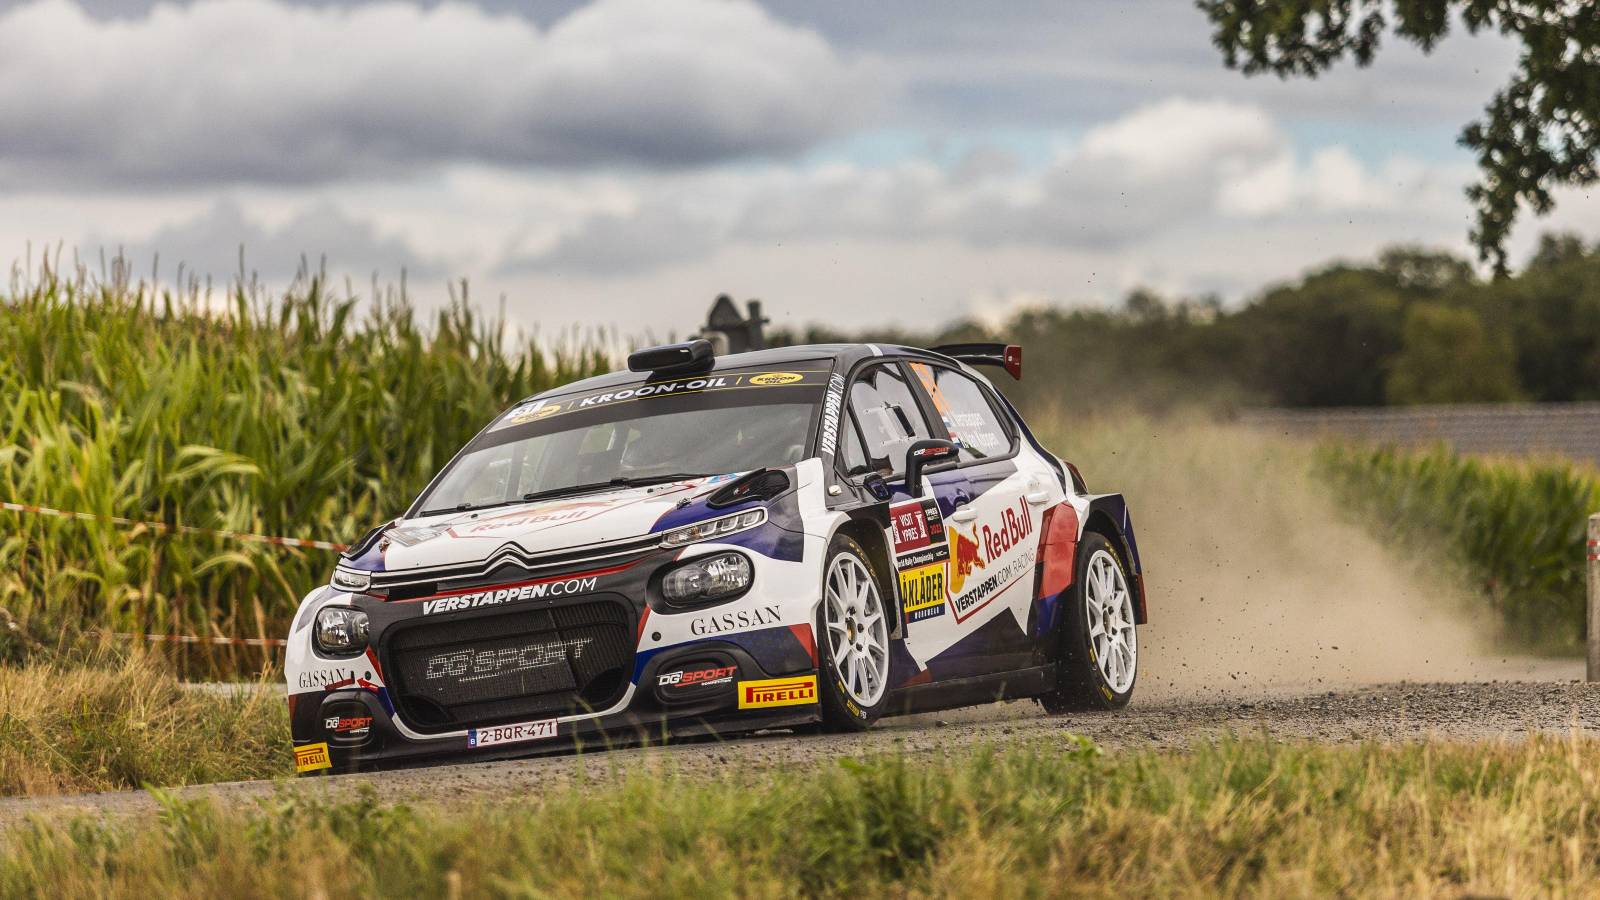 Jos Verstappen in action at the Ypres Rally. Belgium, August 2022.